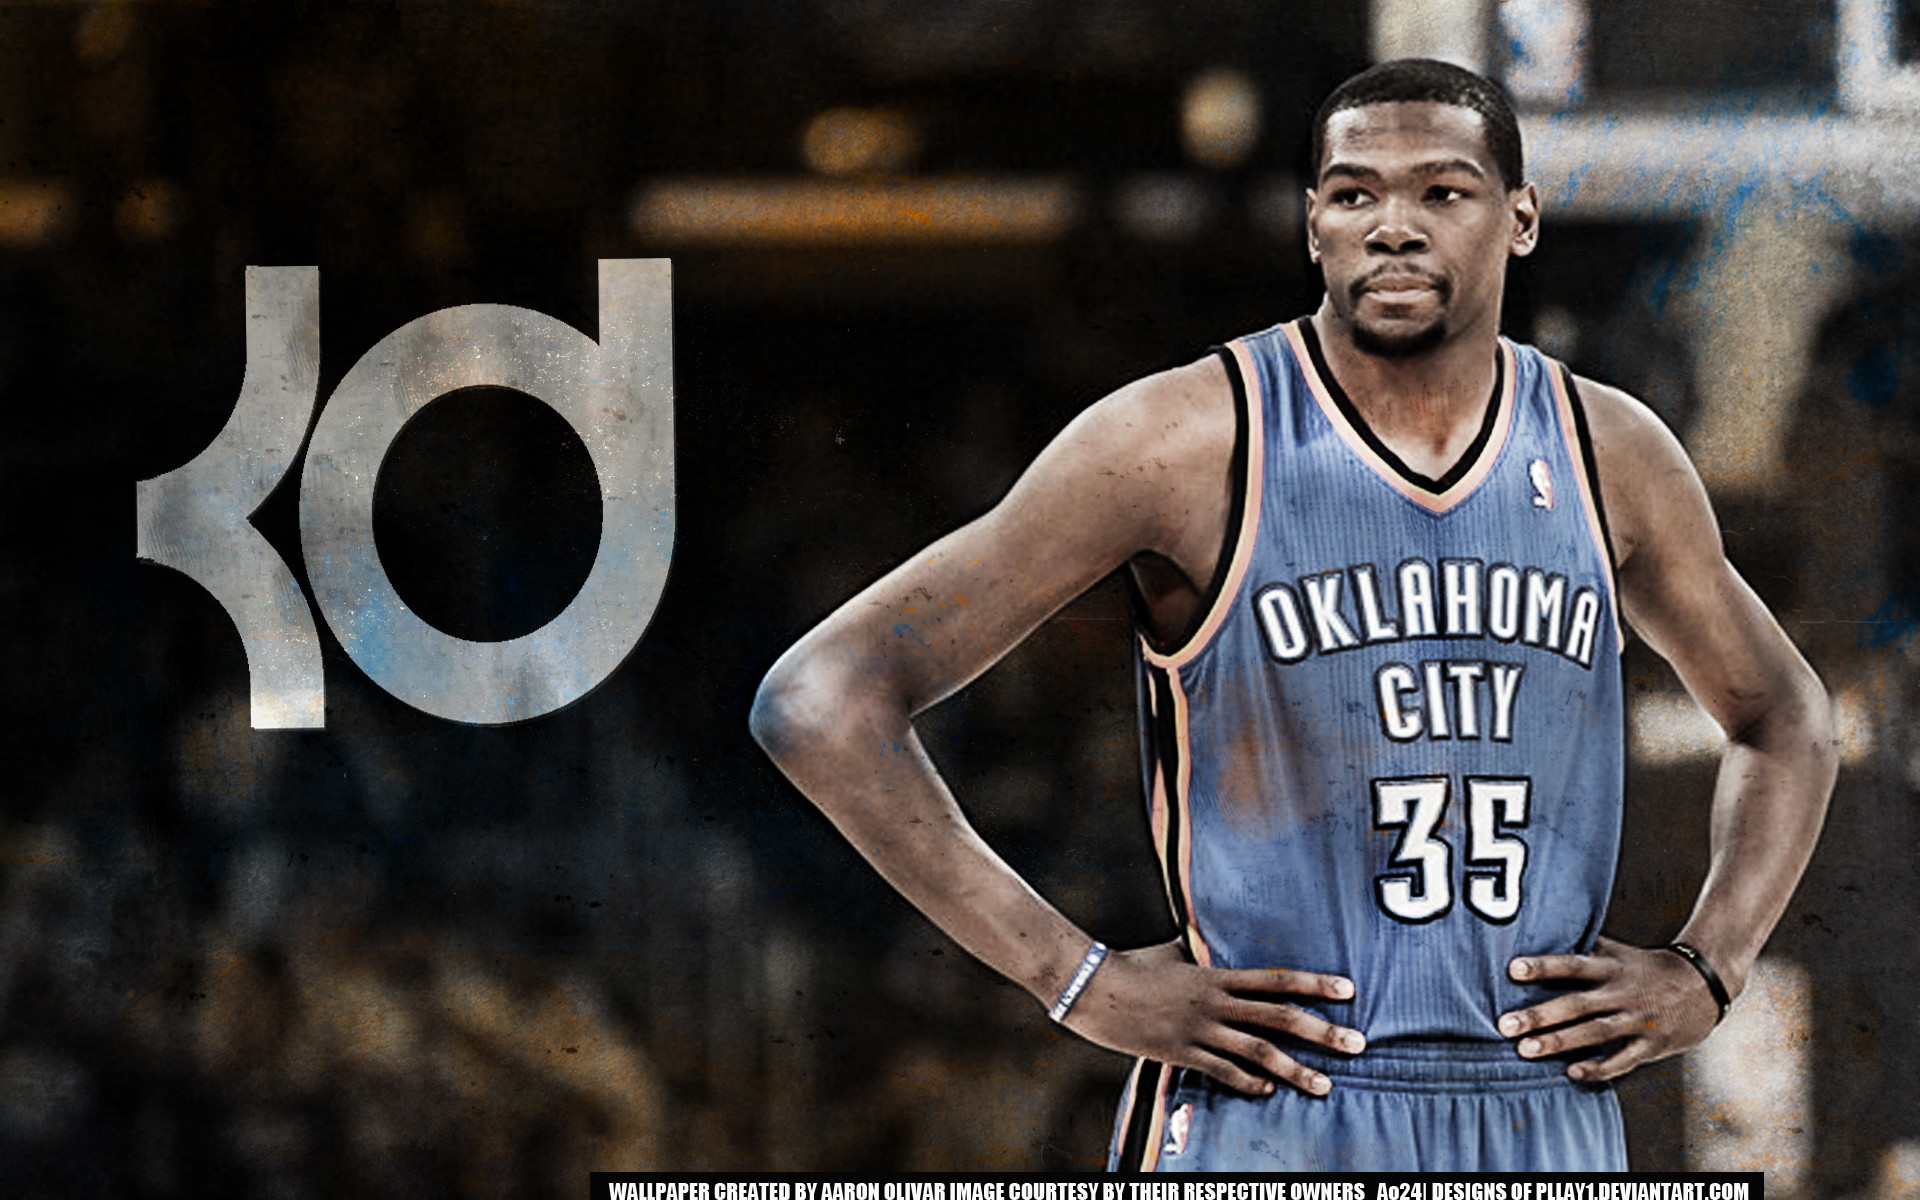 Kevin Durant Wallpapers - Top 35 Best Kevin Durant Backgrounds Download